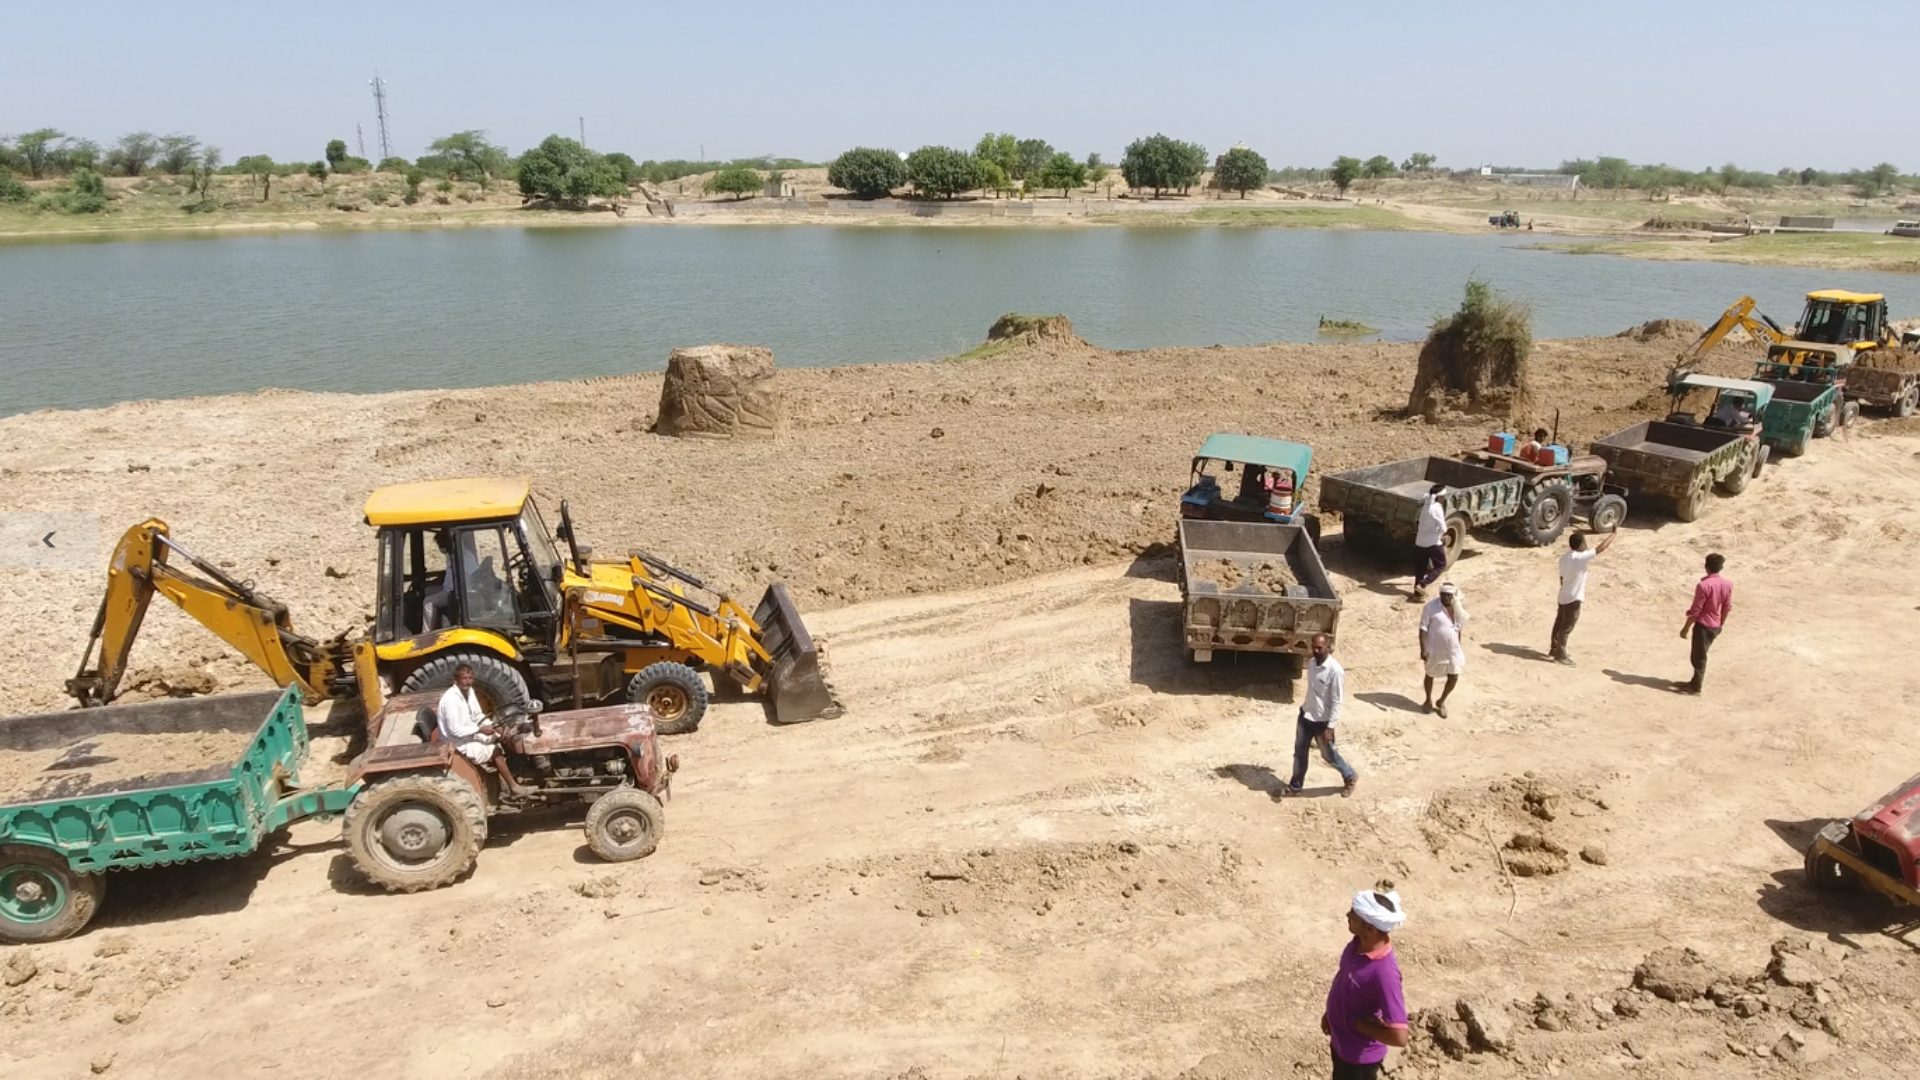 ambuja-cement-foundation-collaborates-with-ate-chandra-foundation-to-revive-traditional-water-bodies-in-rajasthans-pali-district